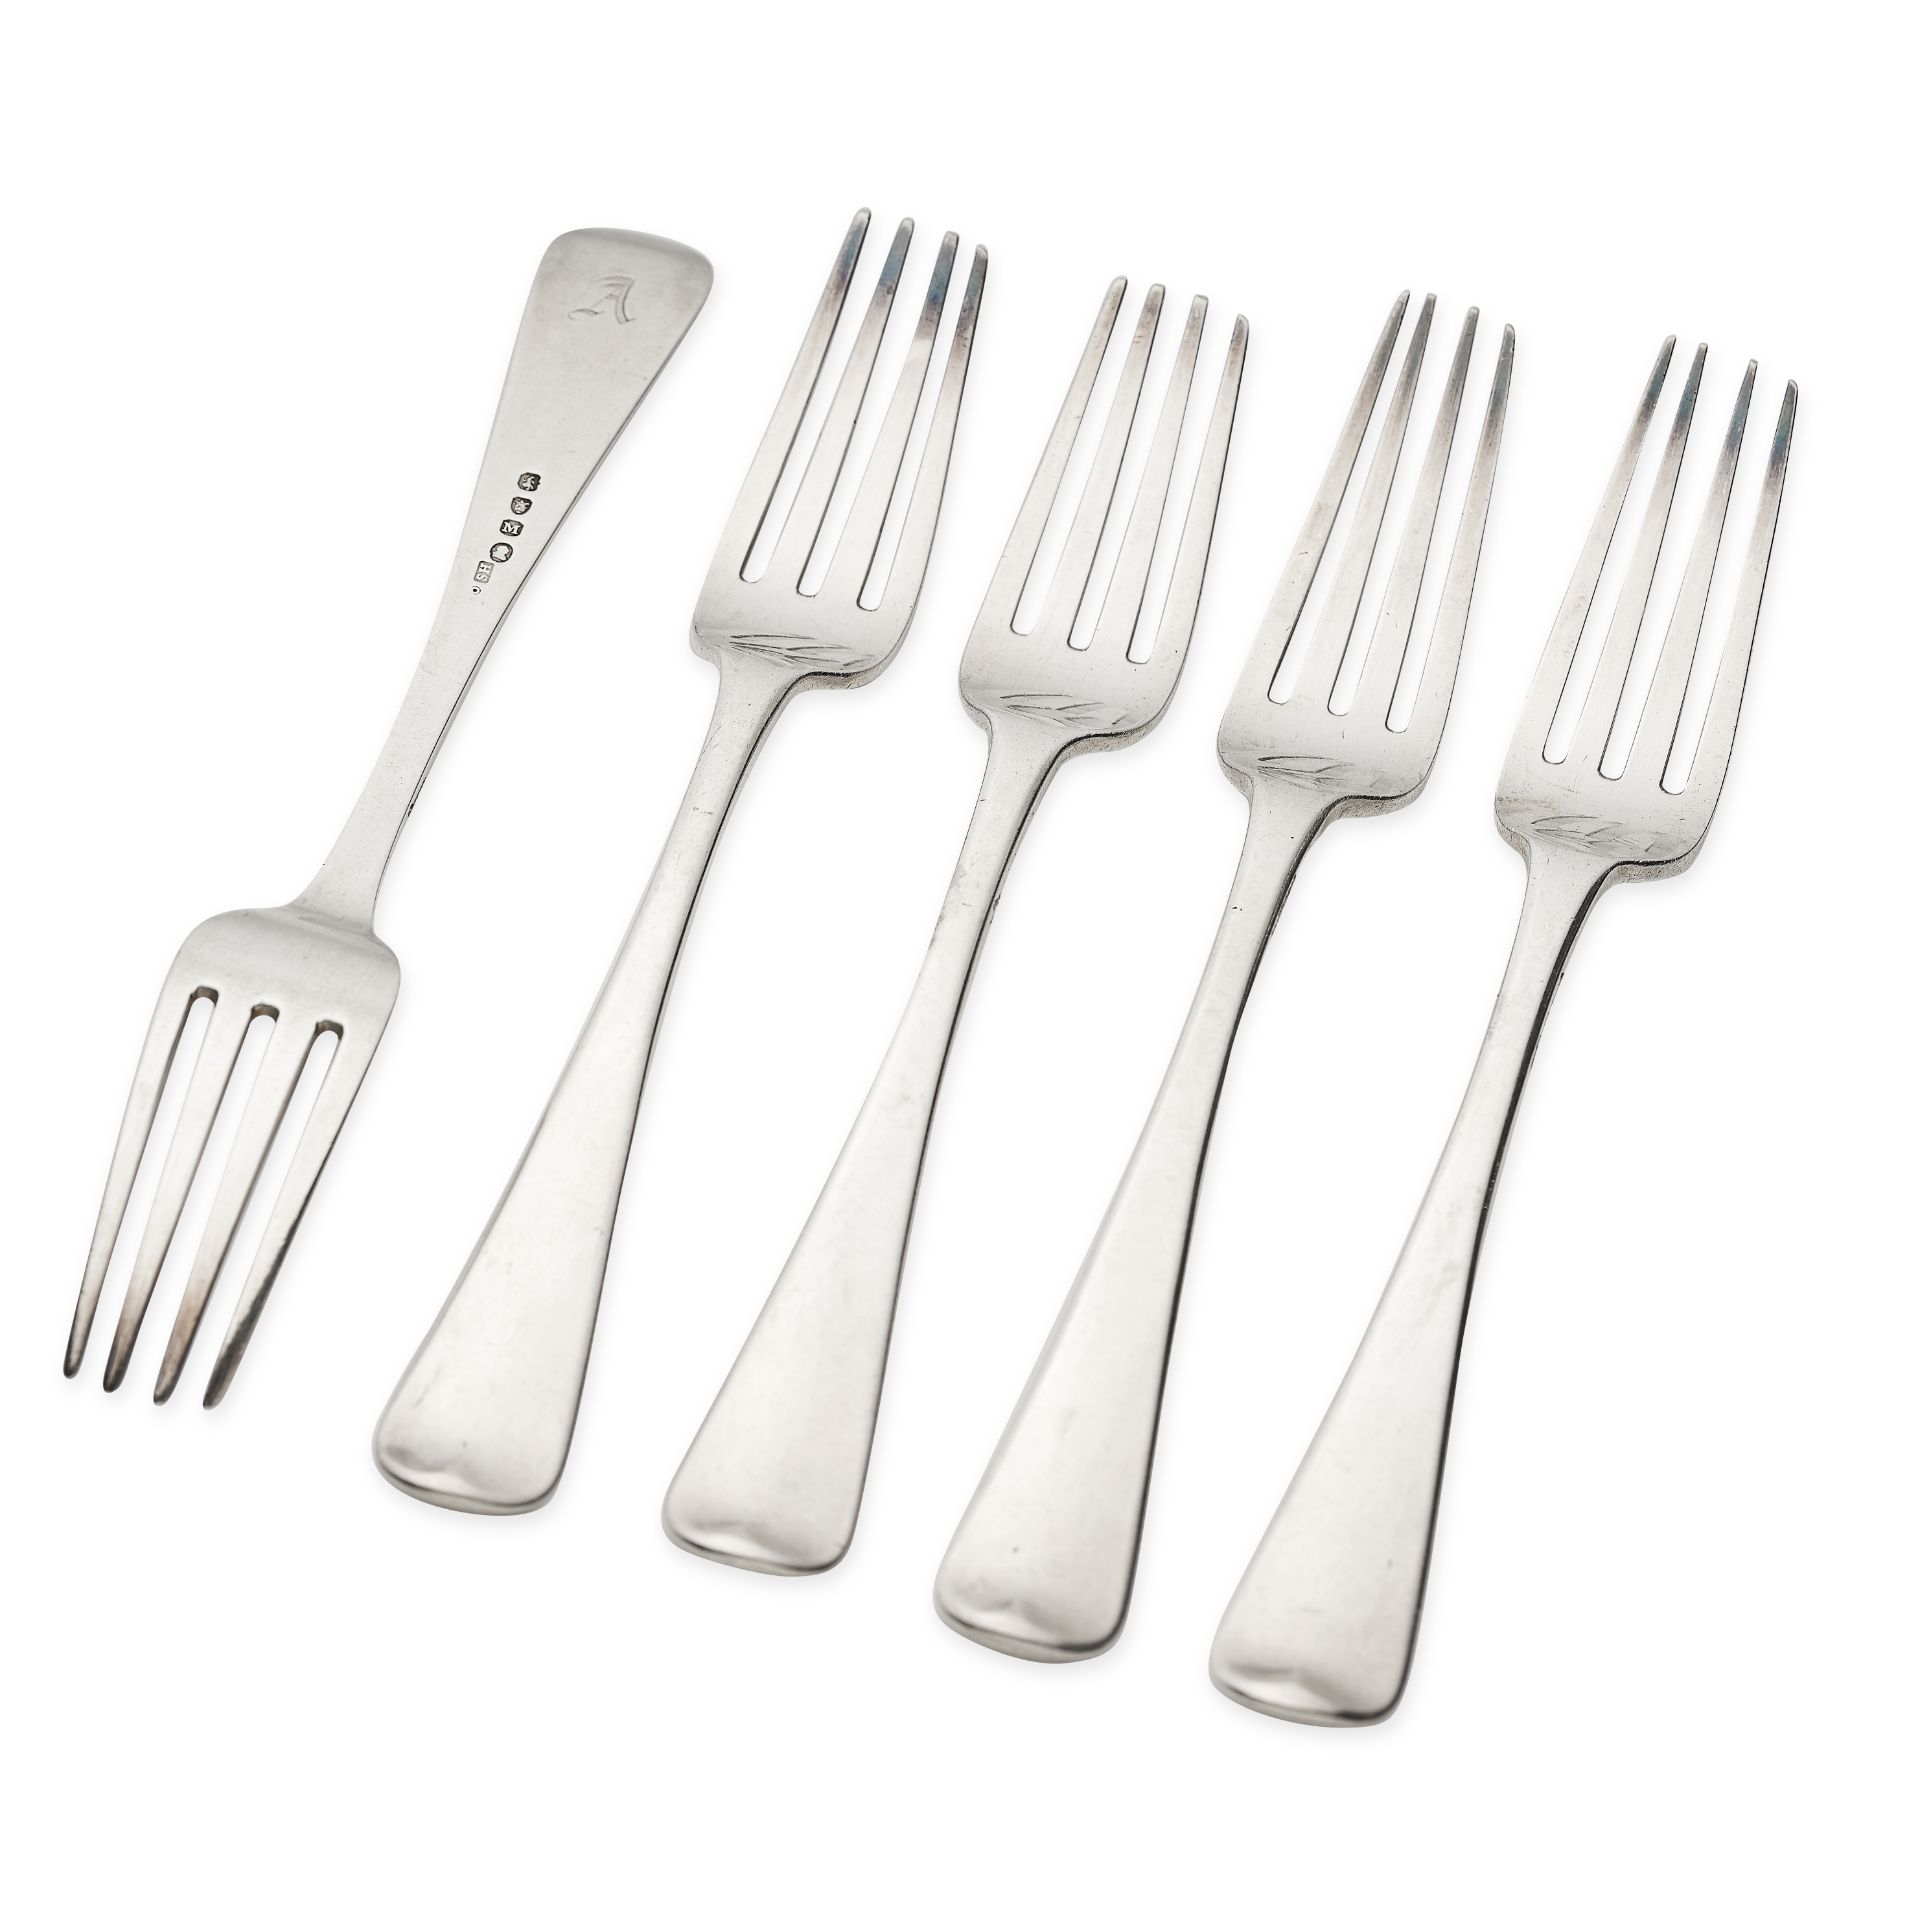 NO RESERVE - FIVE ANTIQUE GEORGE III STERLING SILVER DINNER FORKS, SOLOMON HOUGHAM, LONDON 1807 in